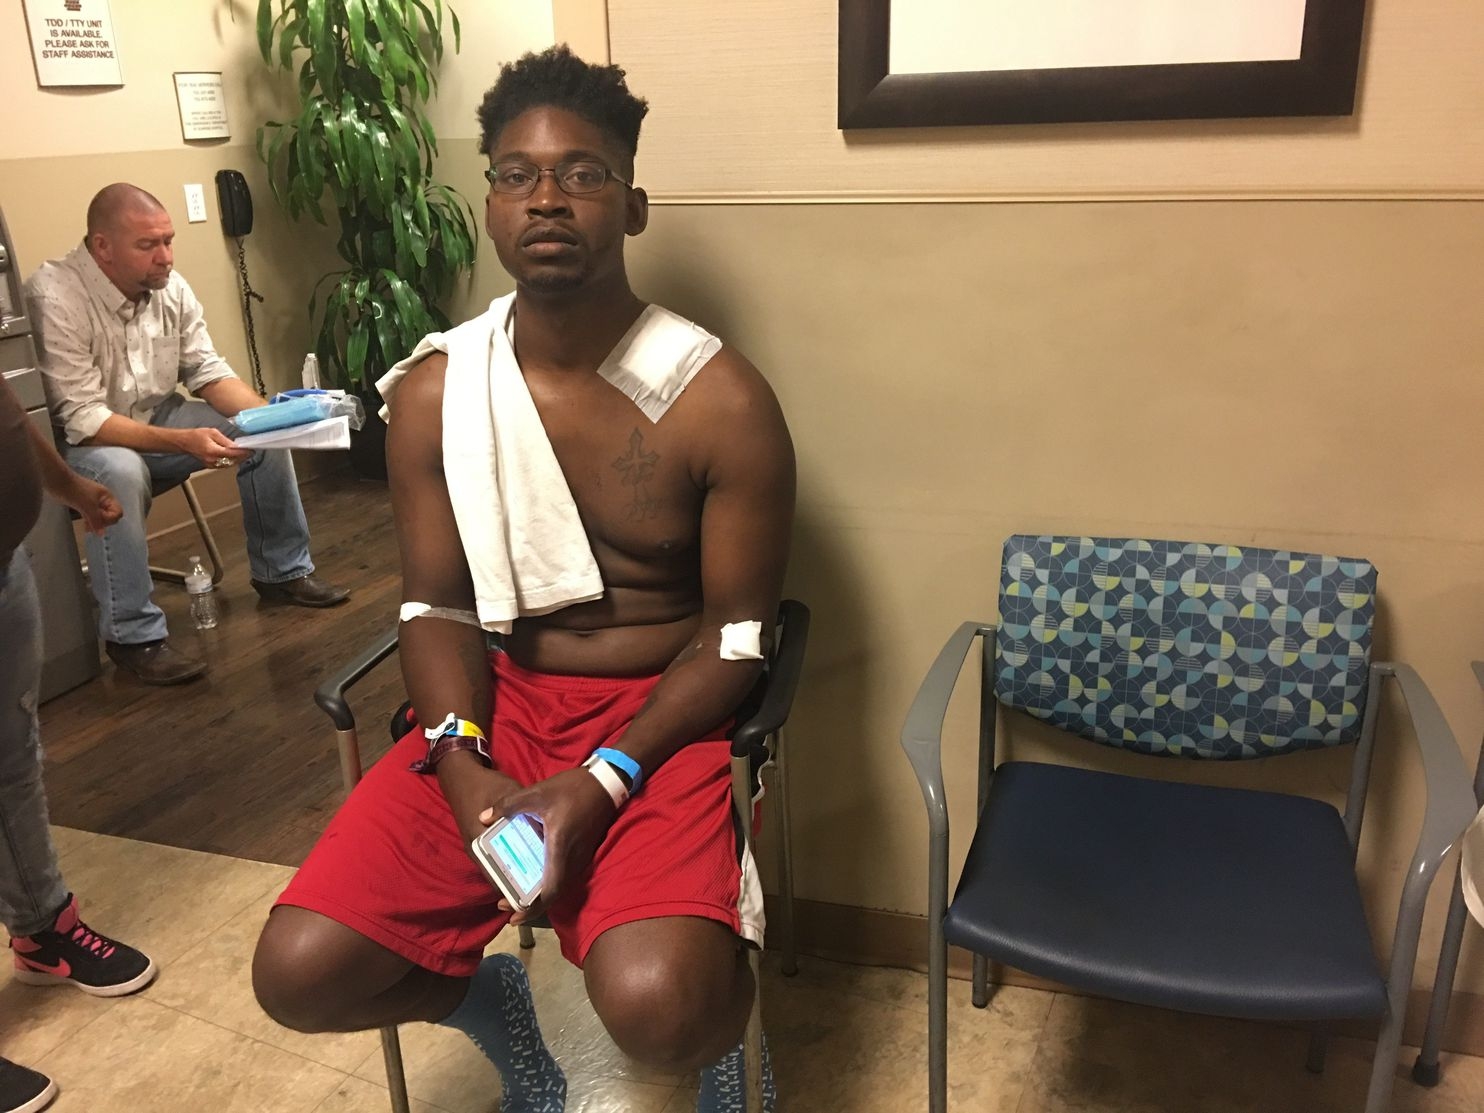 He was shot helping people during the Las Vegas shooting. His heroics helped his photo go viral.